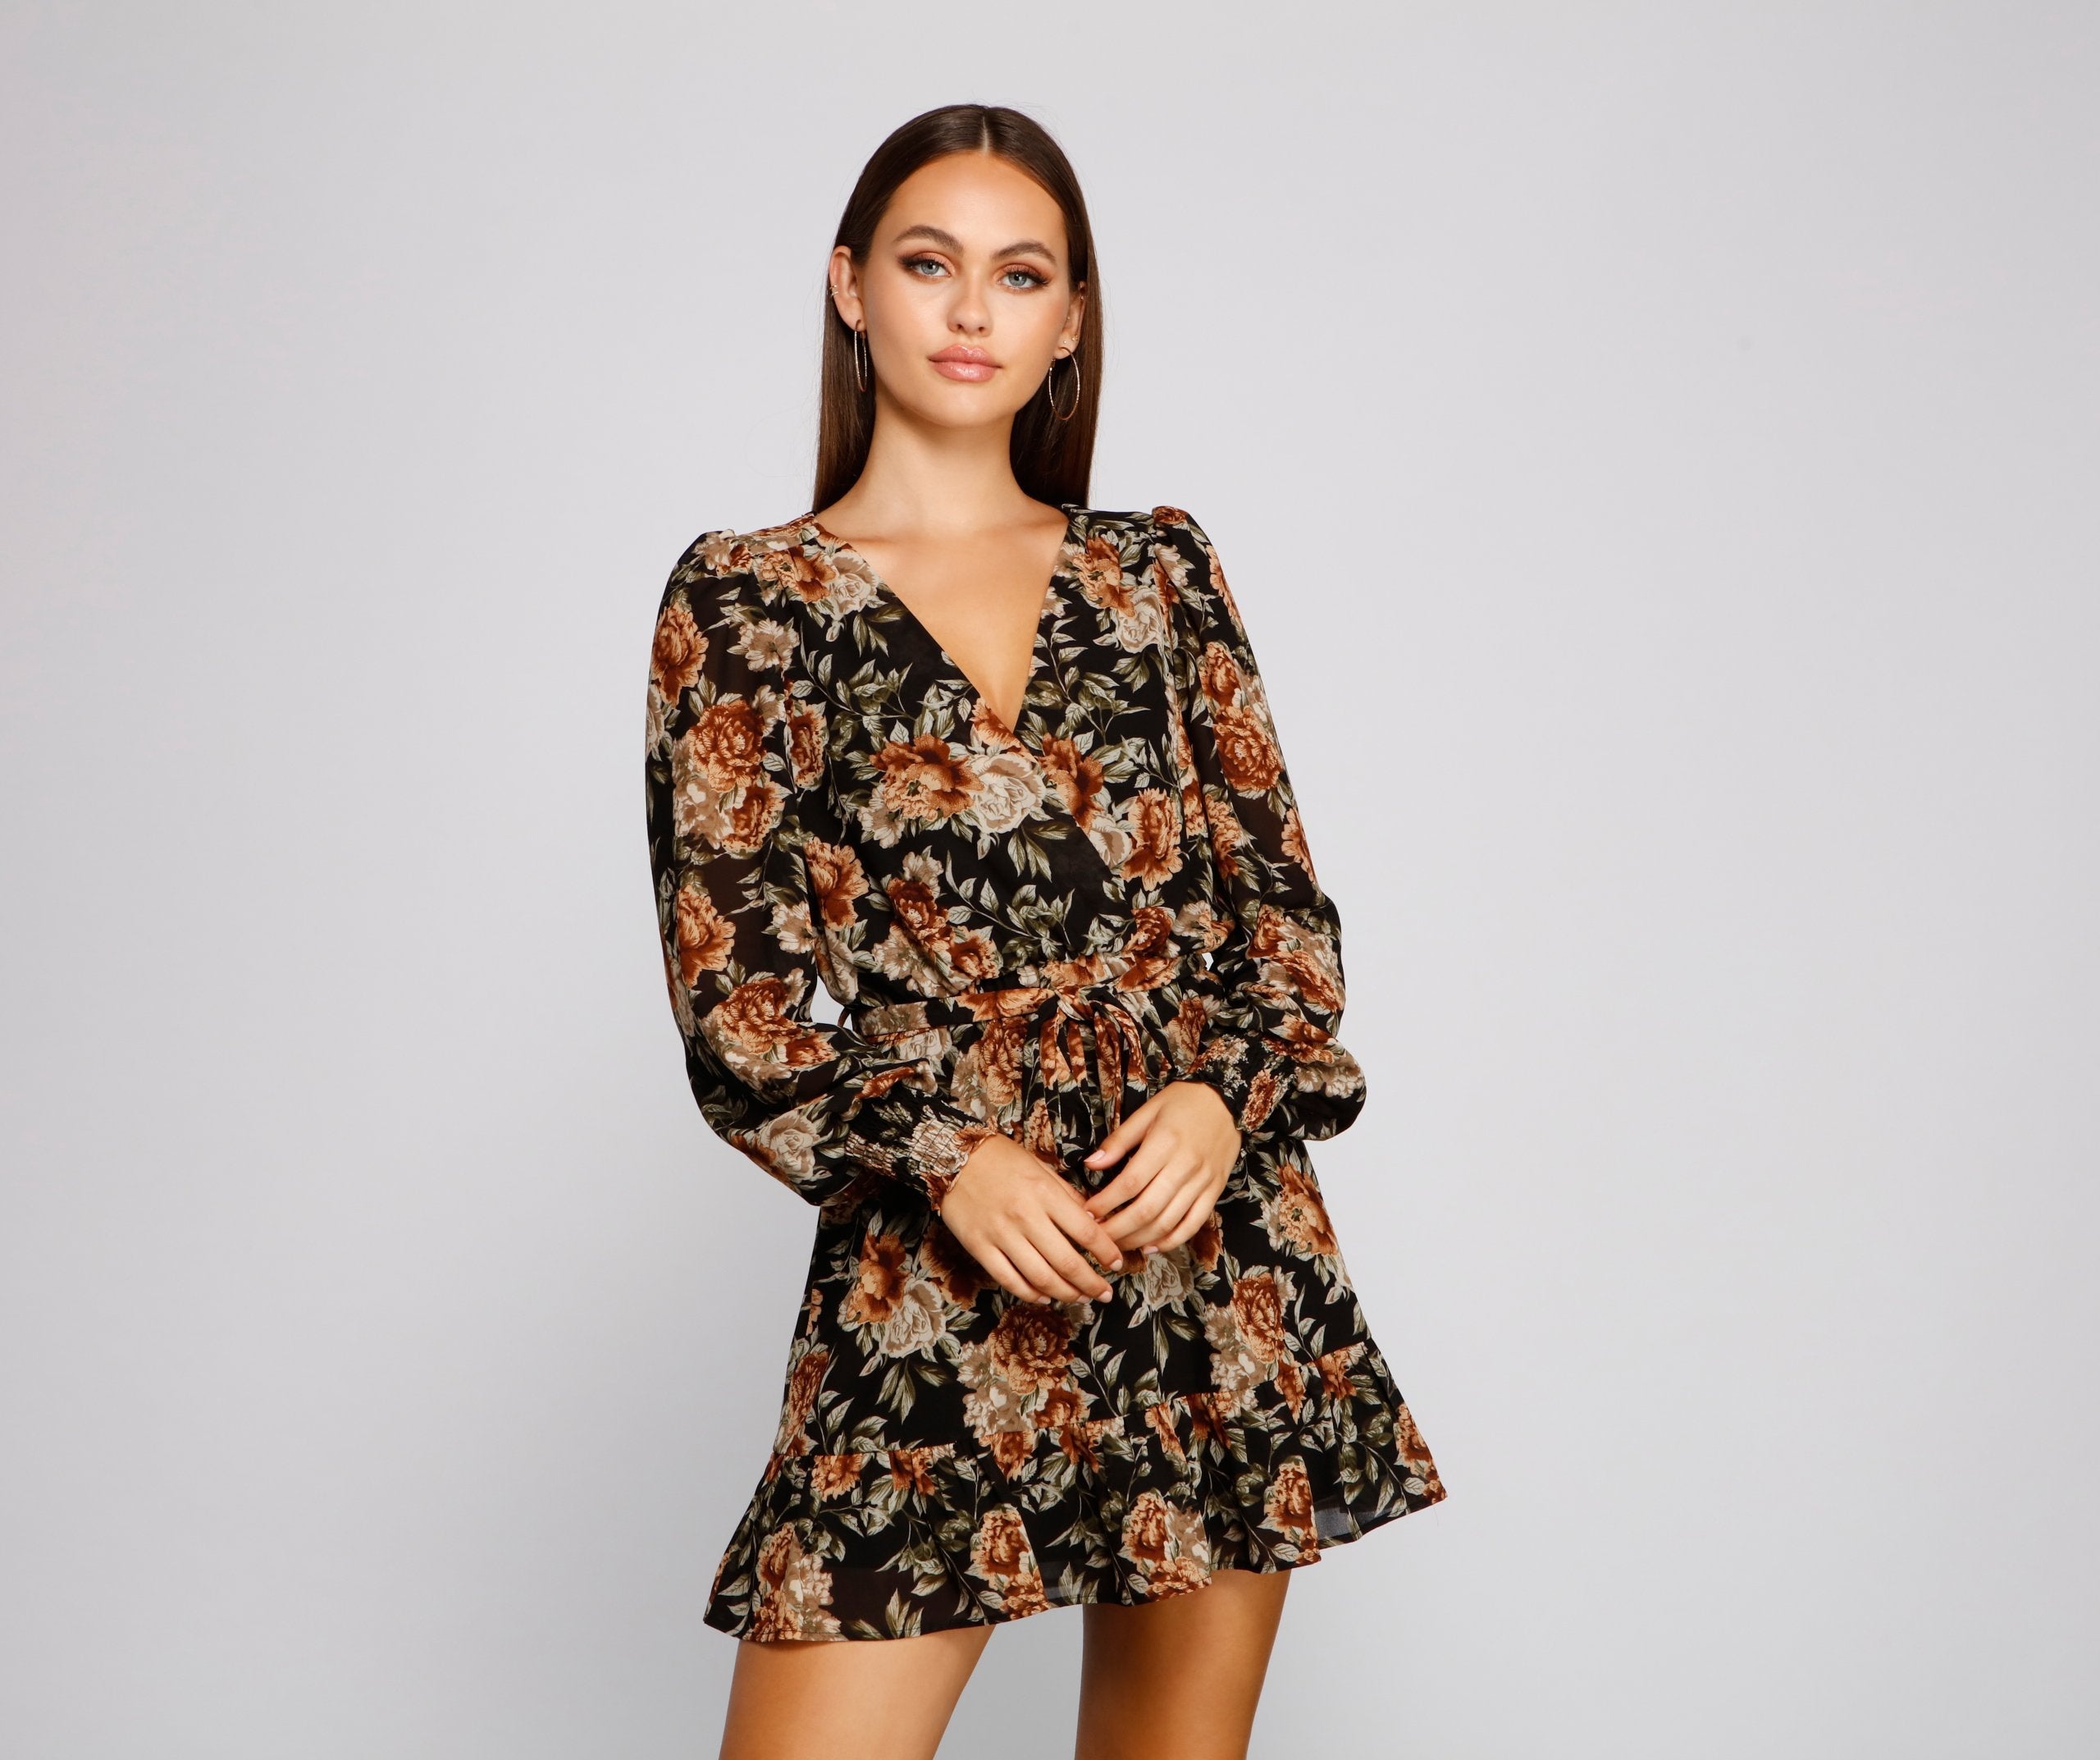 Ruffled Romance Floral Skater Dress - Lady Occasions